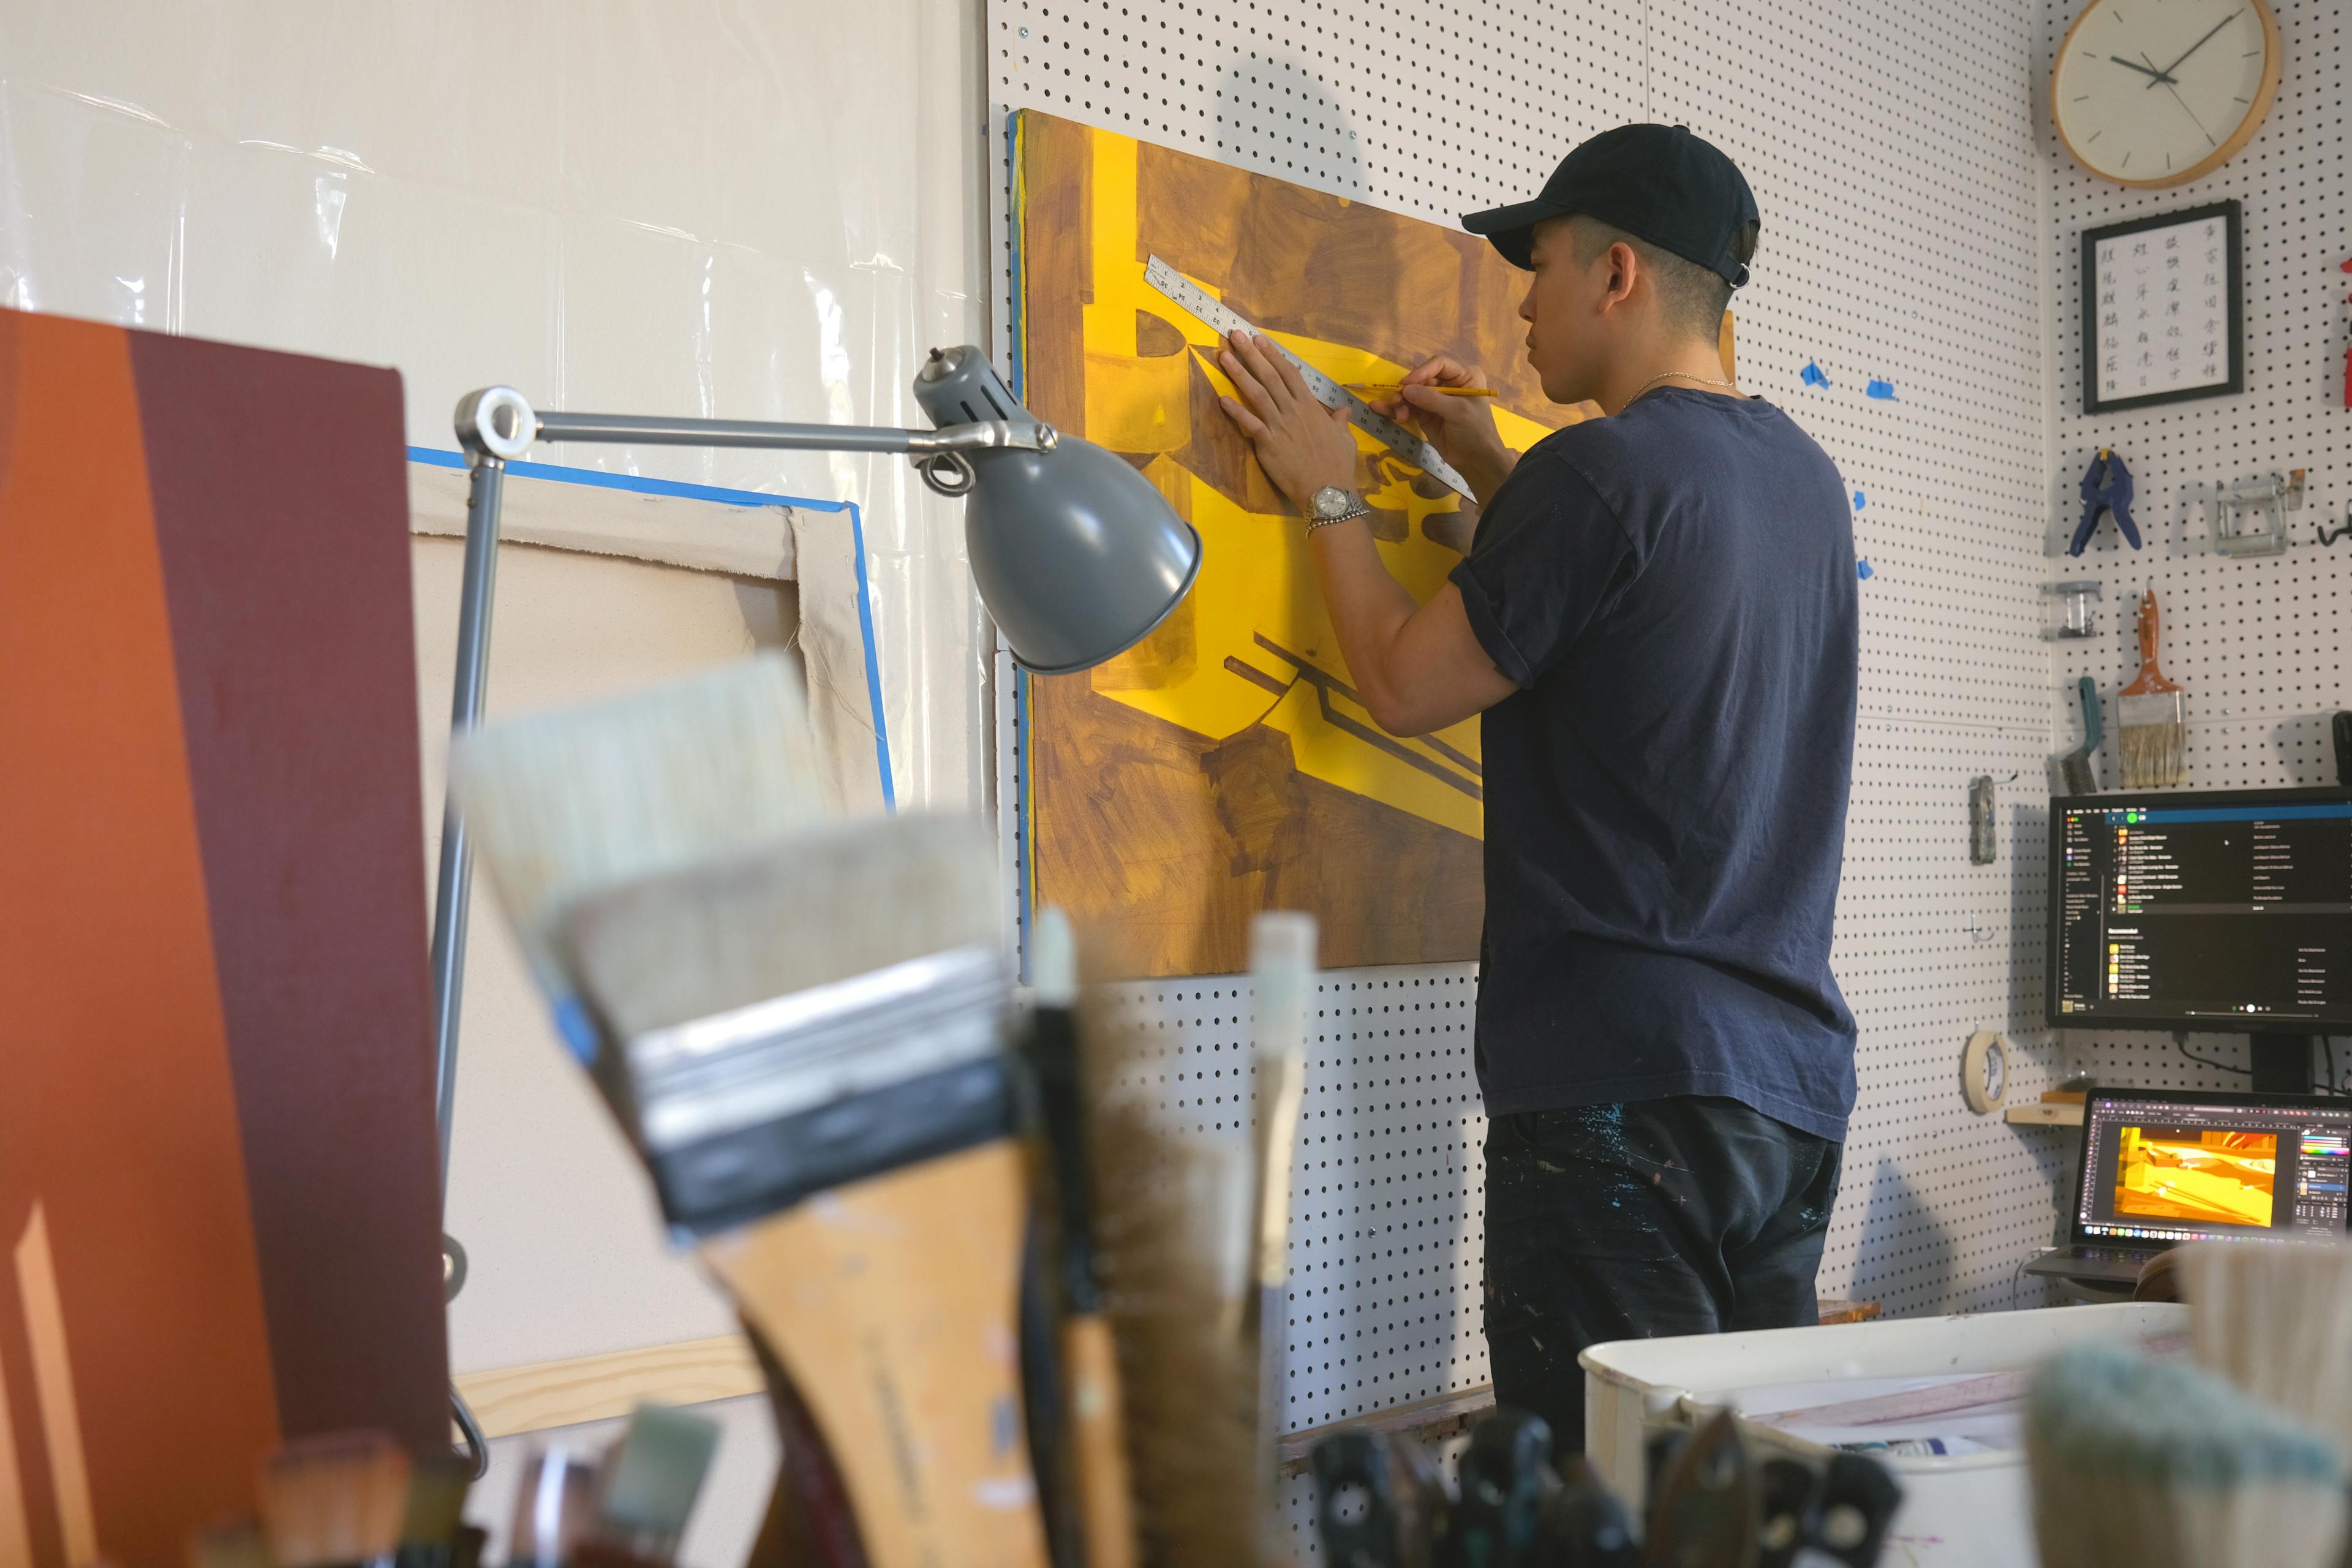 Artist Adrian Kay Wong in his studio using a ruler to create a straight line on a yellow canvas.